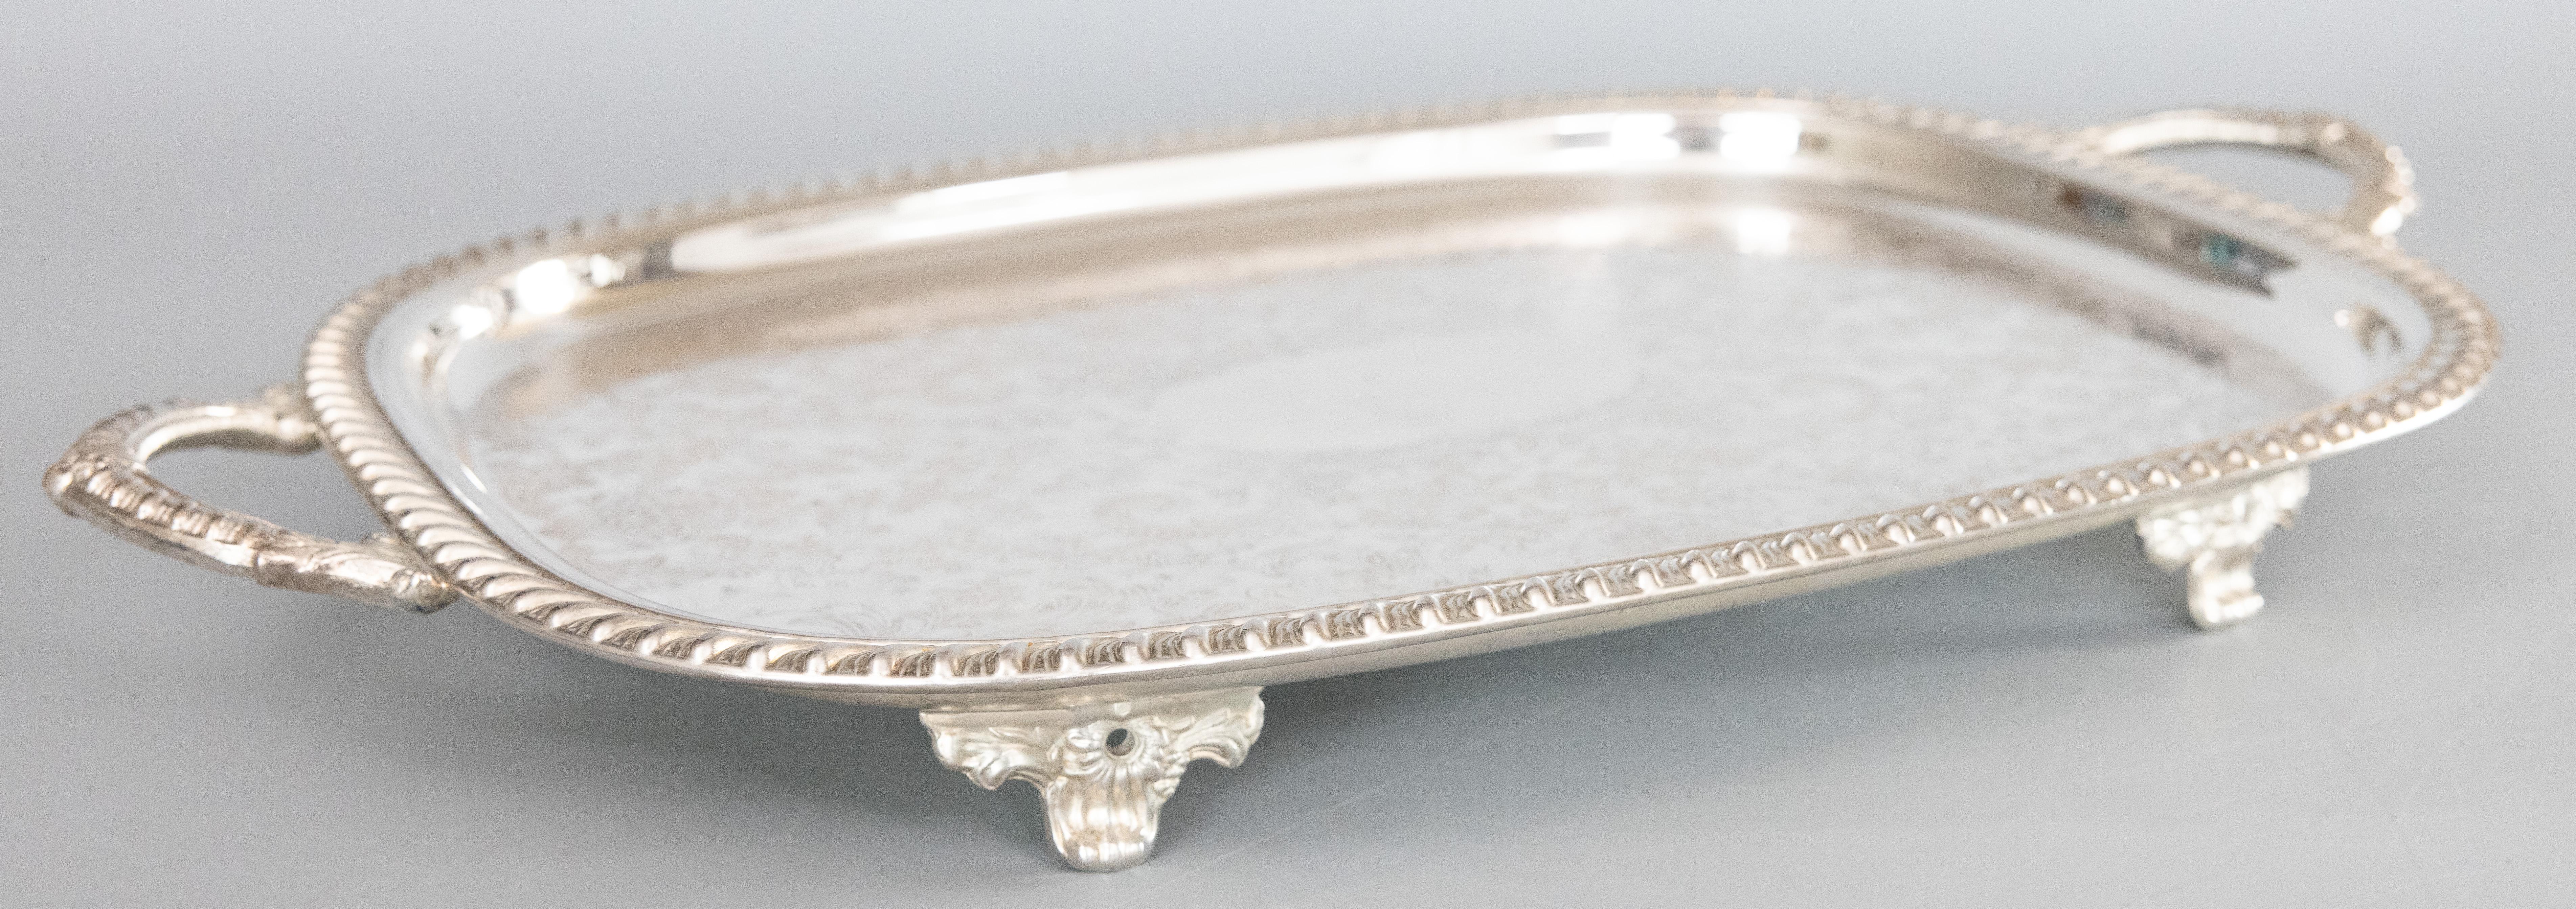 American Large Vintage Silver Plate Footed Tray With Handles, circa 1950 For Sale